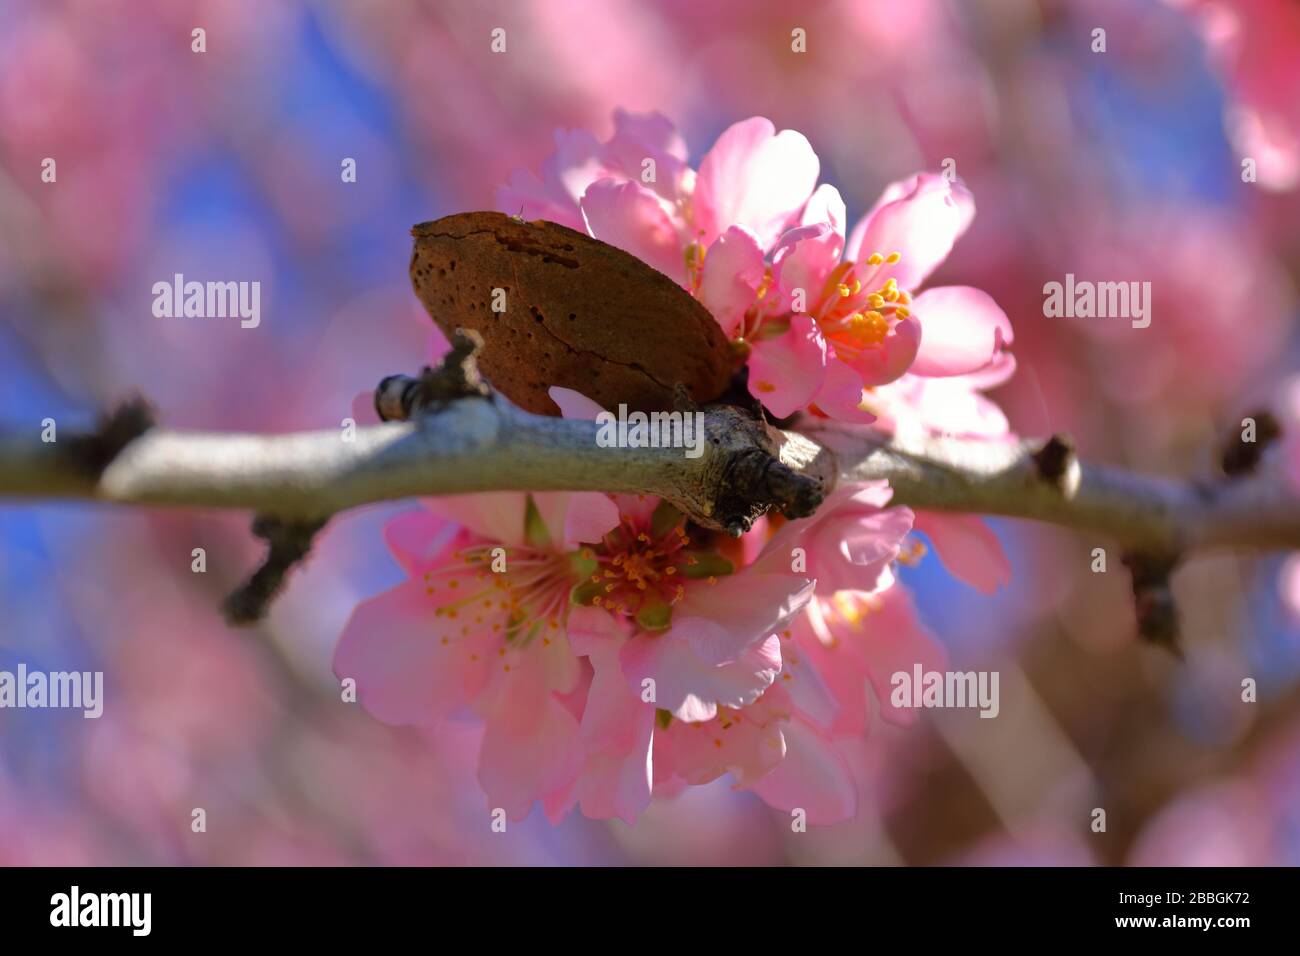 Pink almond blossoms and almond fruit, Costa Blanca, southern Spain Stock Photo